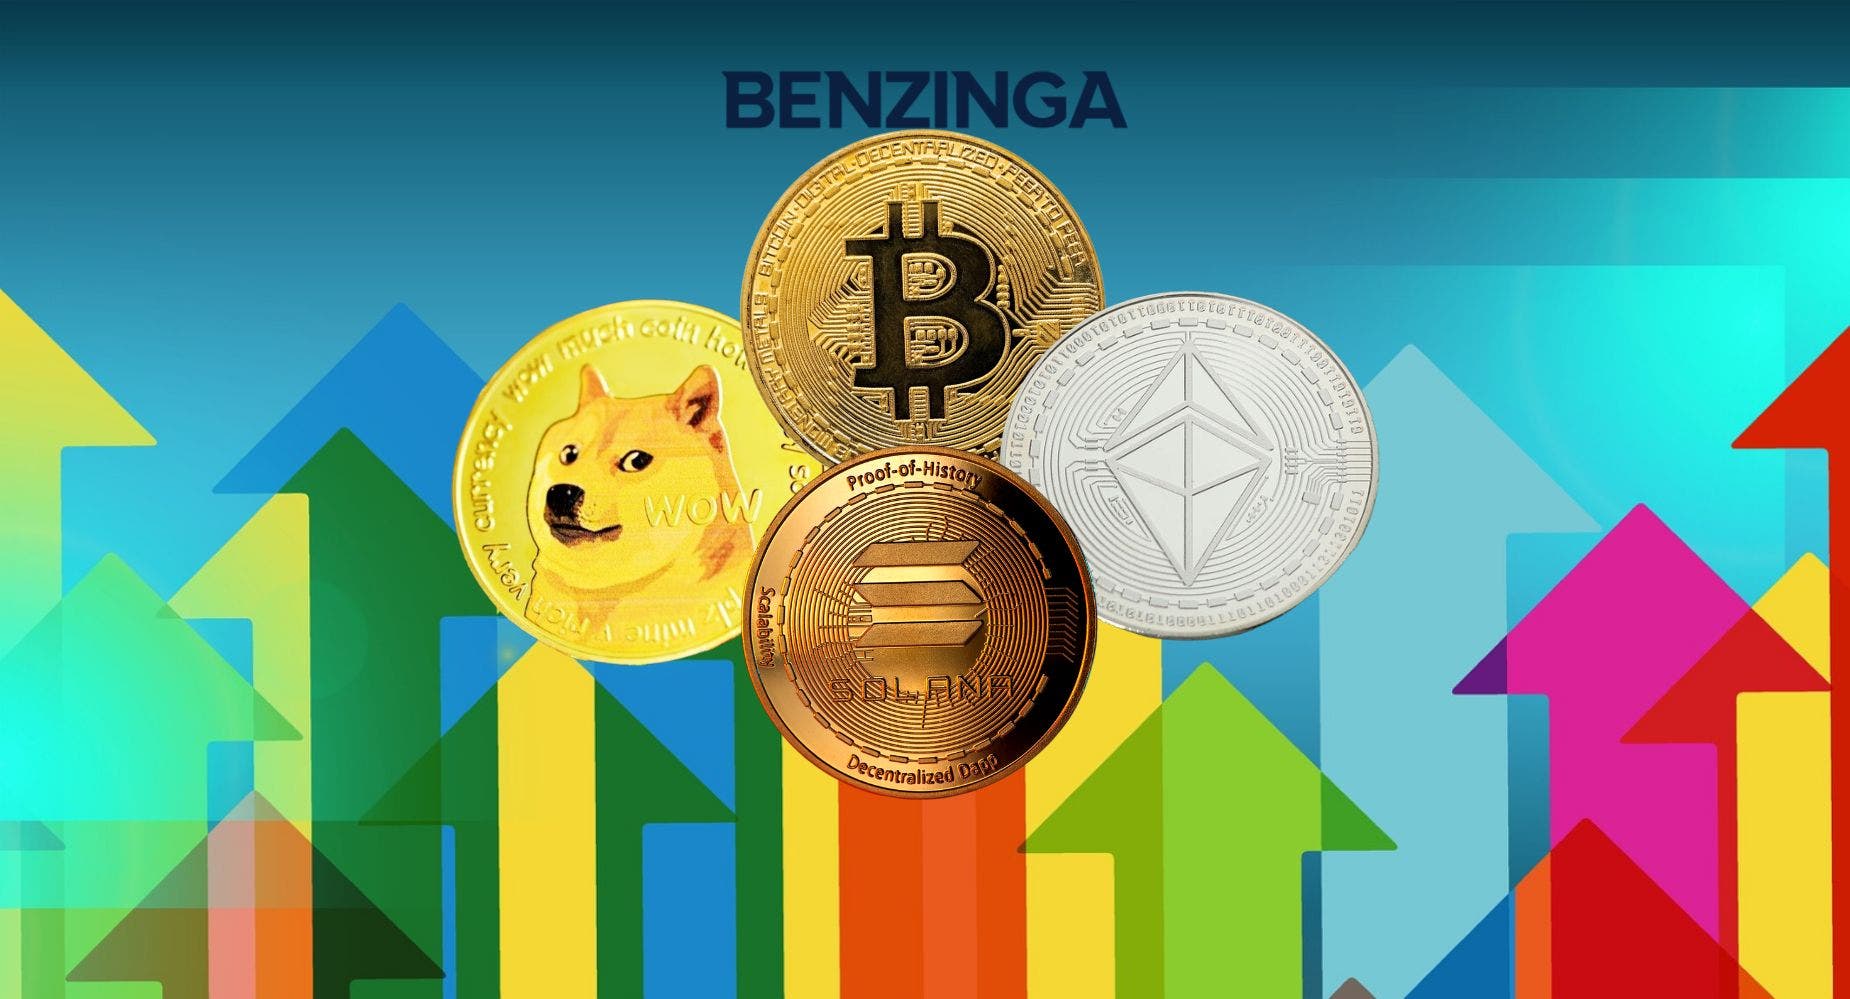 EXCLUSIVE: Will Bitcoin, Dogecoin, Ethereum Or Solana Gain More In 2023? 39% Of Benzinga Followers Favor This Crypto